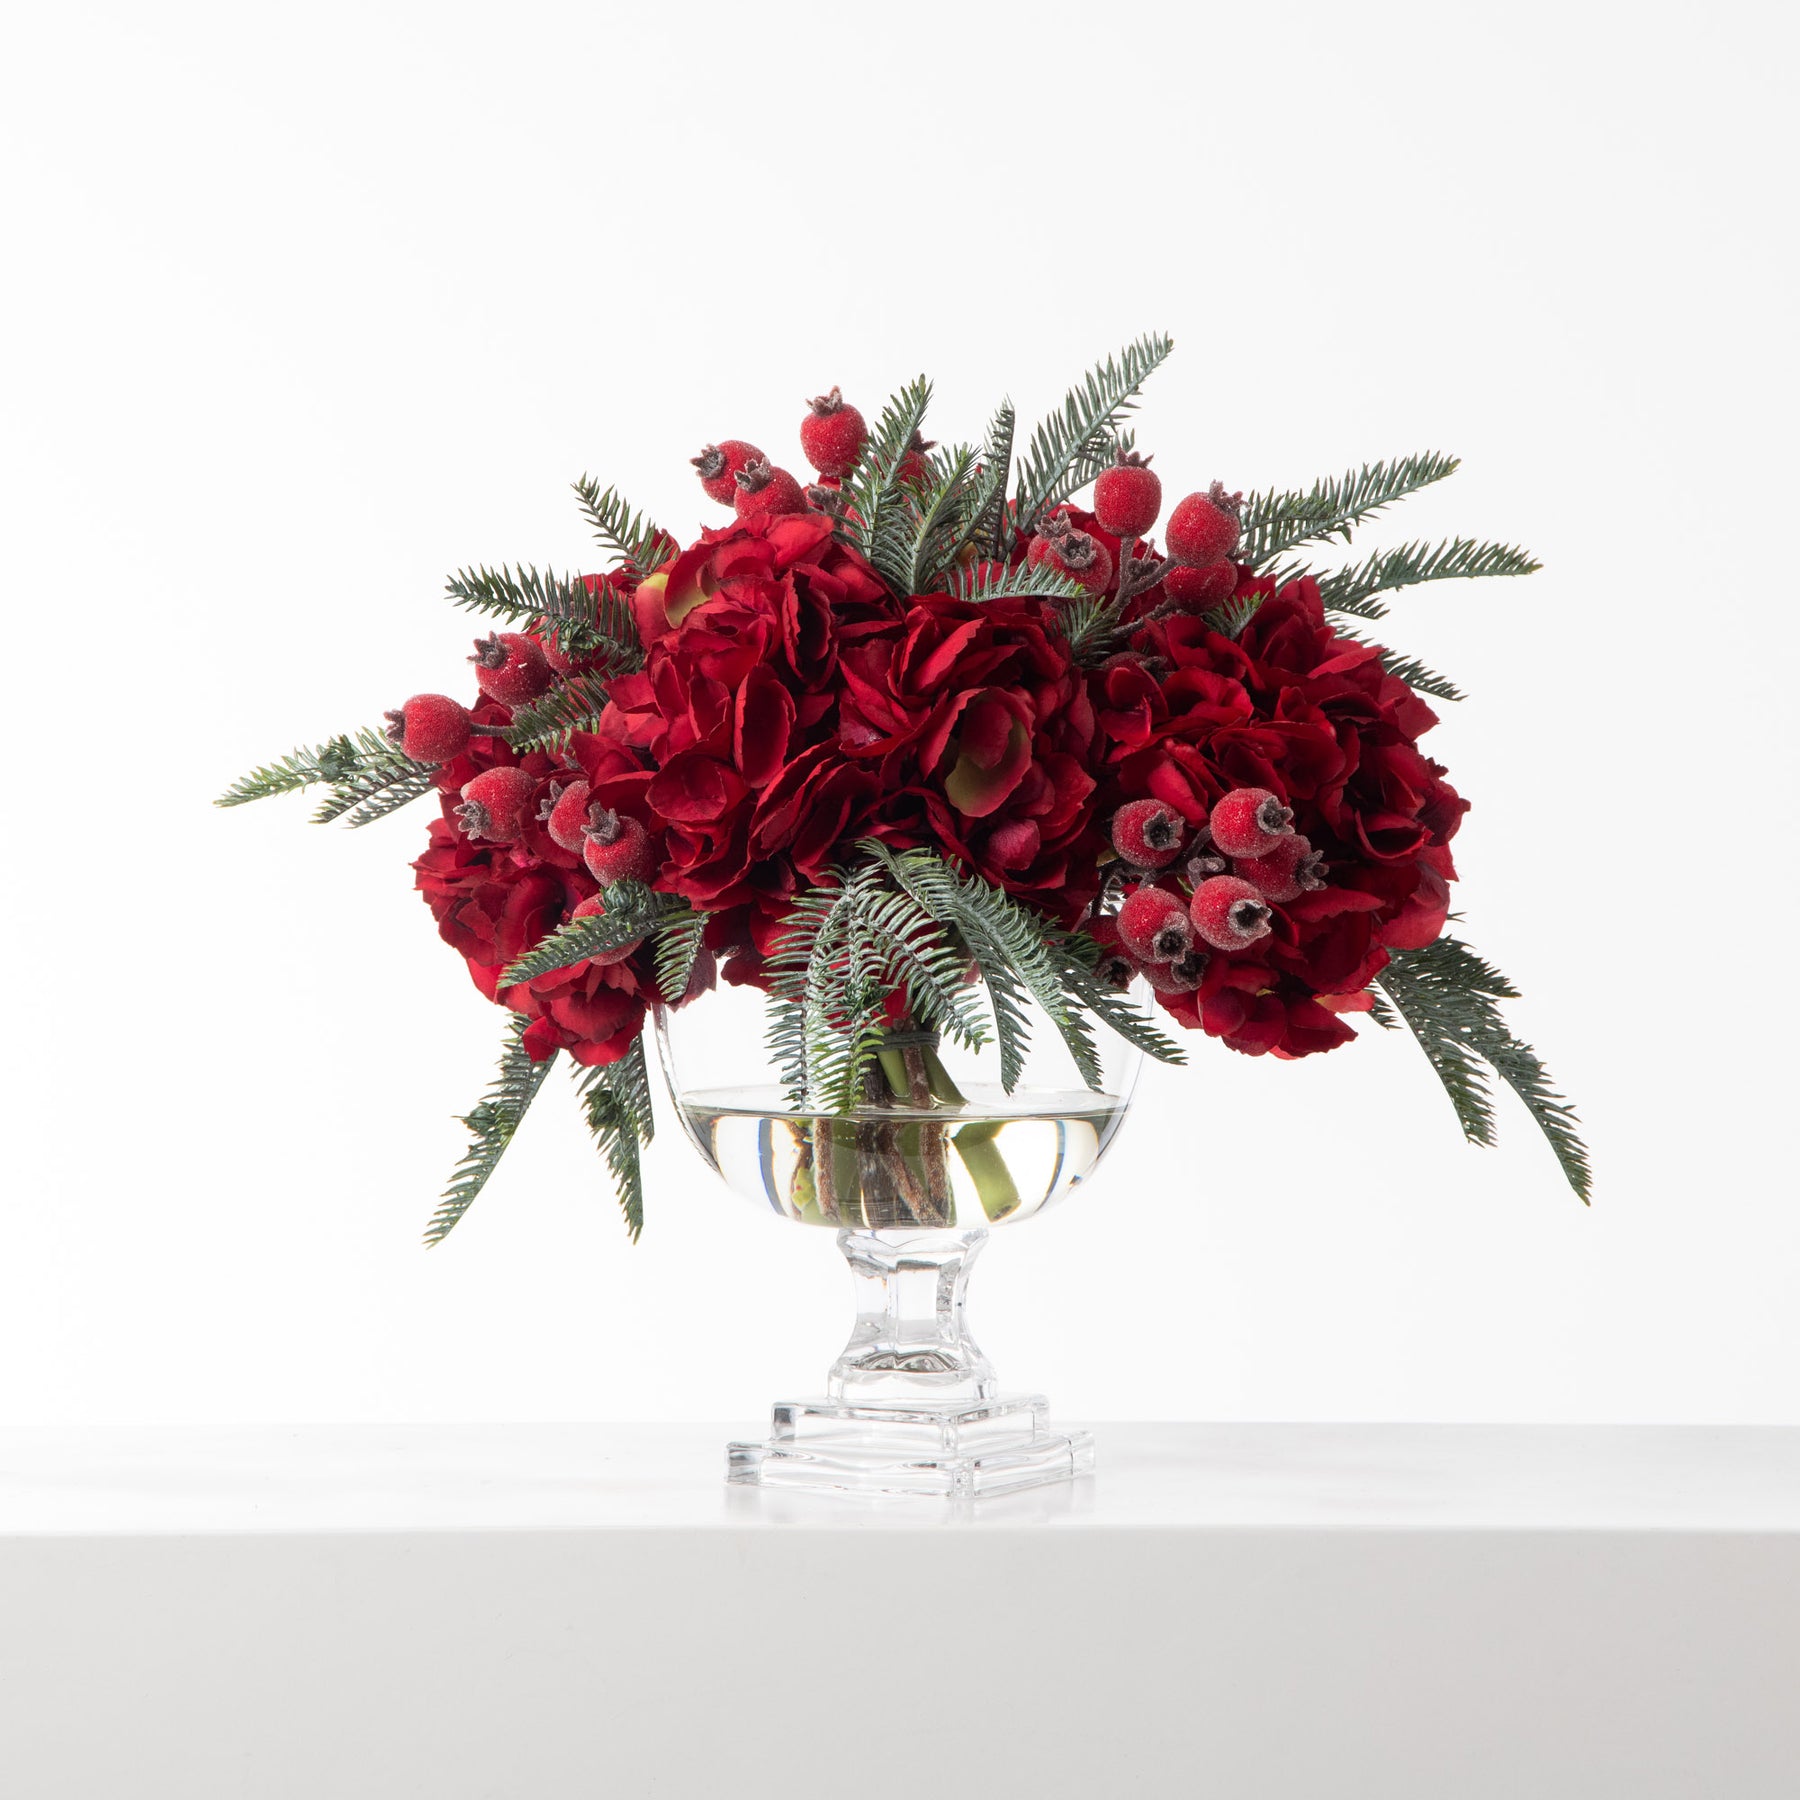 Wild Variegated Holly Berry Branches in Farmhouse Style Jug Vase Christmas  Holiday Water Illusion Arrangement